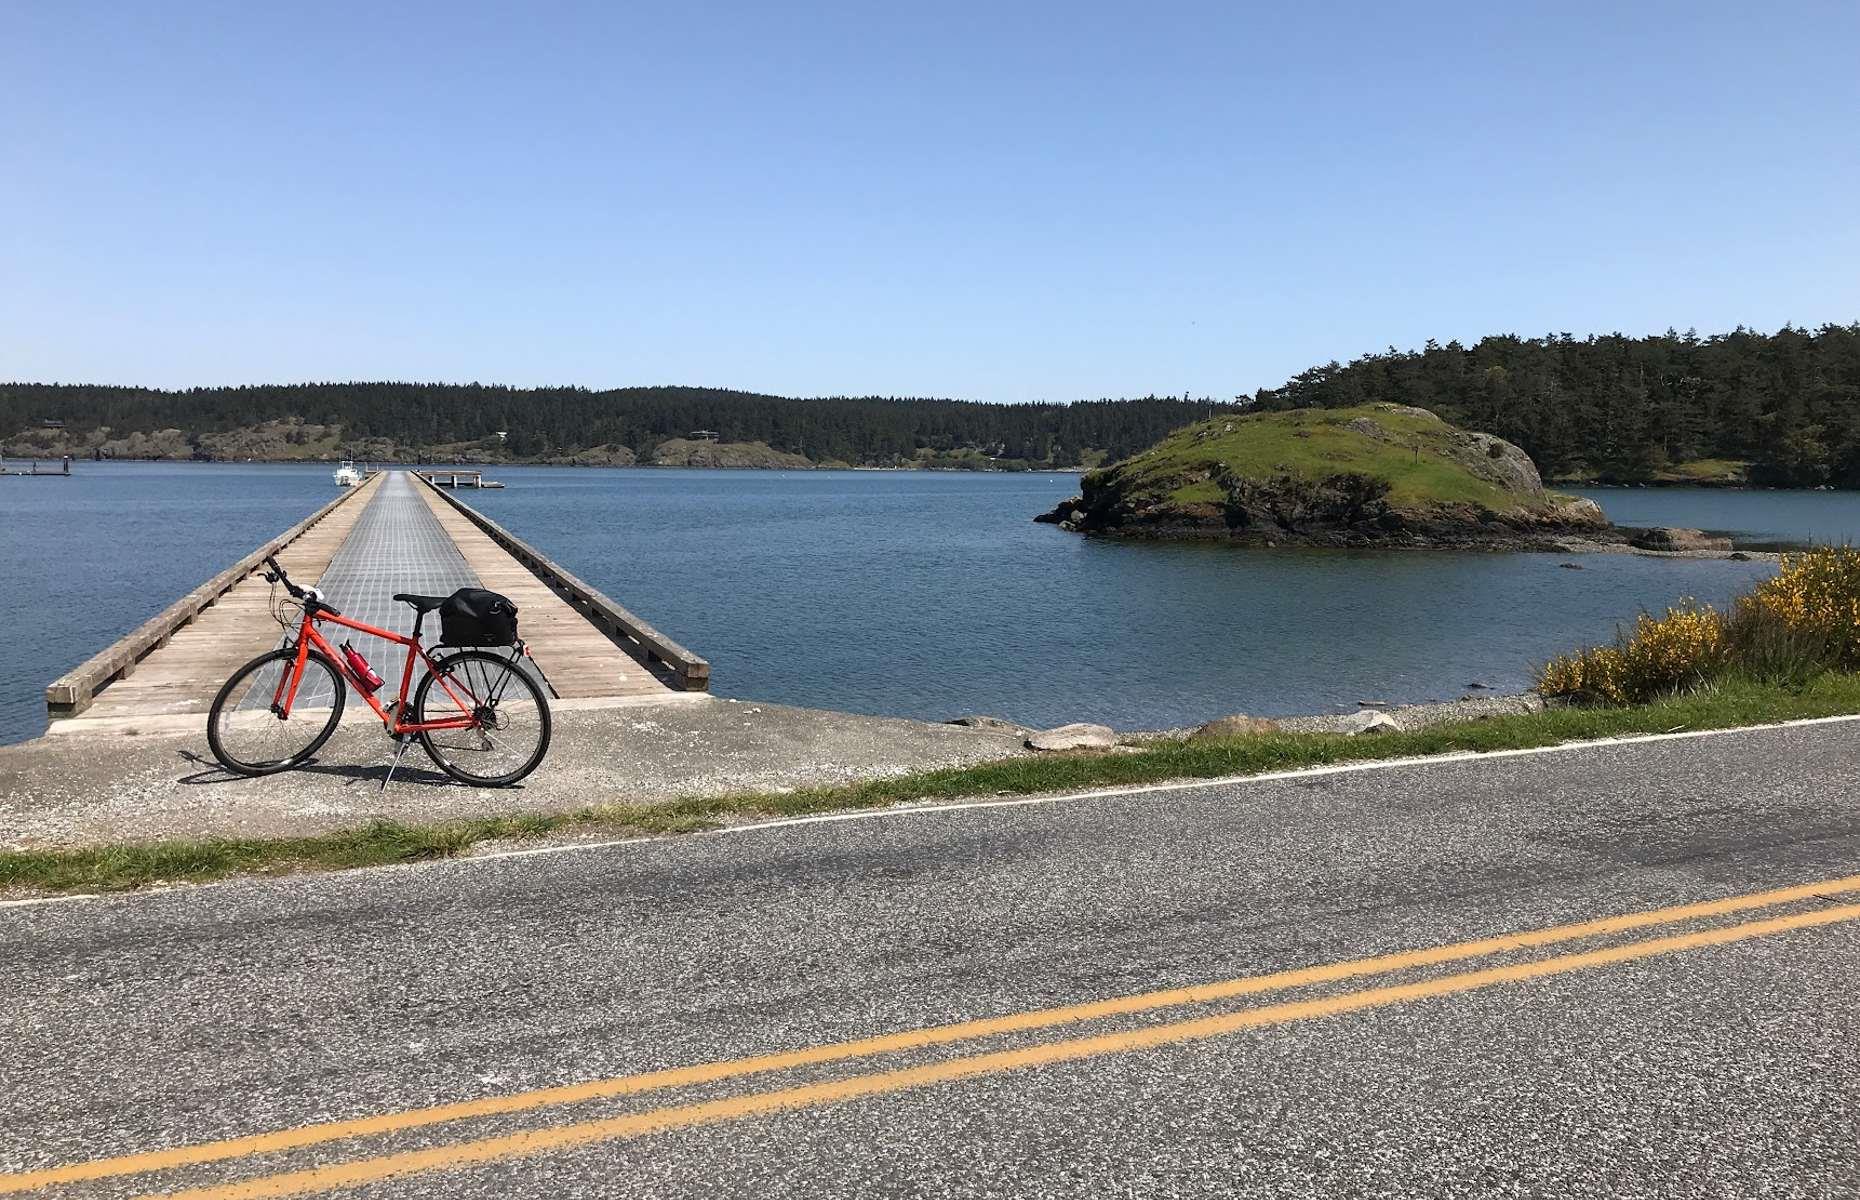 <p>If you’re after a full-blown, multi-day adventure, <a href="https://www.macsadventure.com/holiday-2302/san-juan-islands-biking-classic/">this incredibly beautiful bike tour</a> through Washington’s San Juan Islands is well worth considering. The seven-day adventure covers a total of 134 miles (216km) by either regular or e-bike, including ferry trips across the Salish Sea, six nights of accommodation at boutique inns and a tried-and-tested, detailed itinerary.</p>